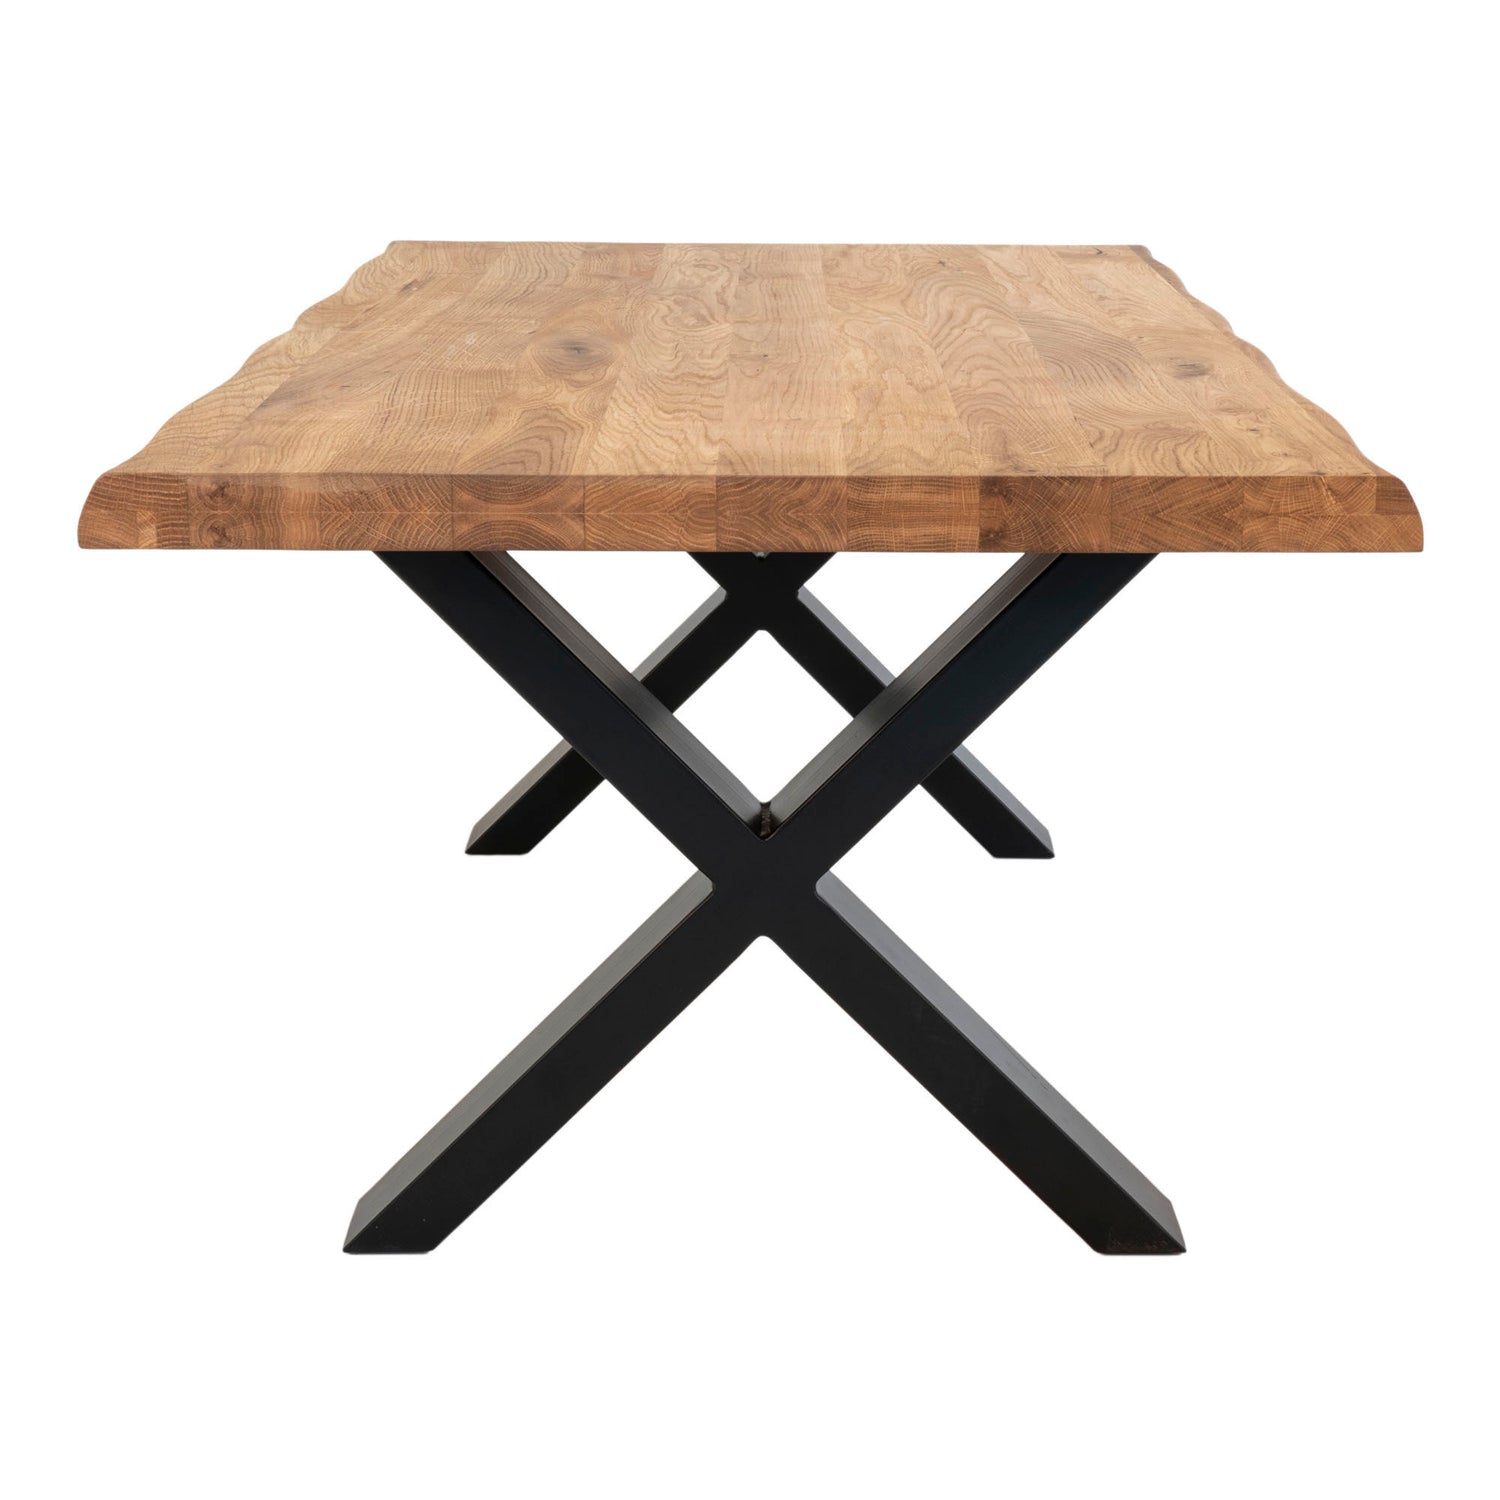 House Nordic - Toulon Coffee Table